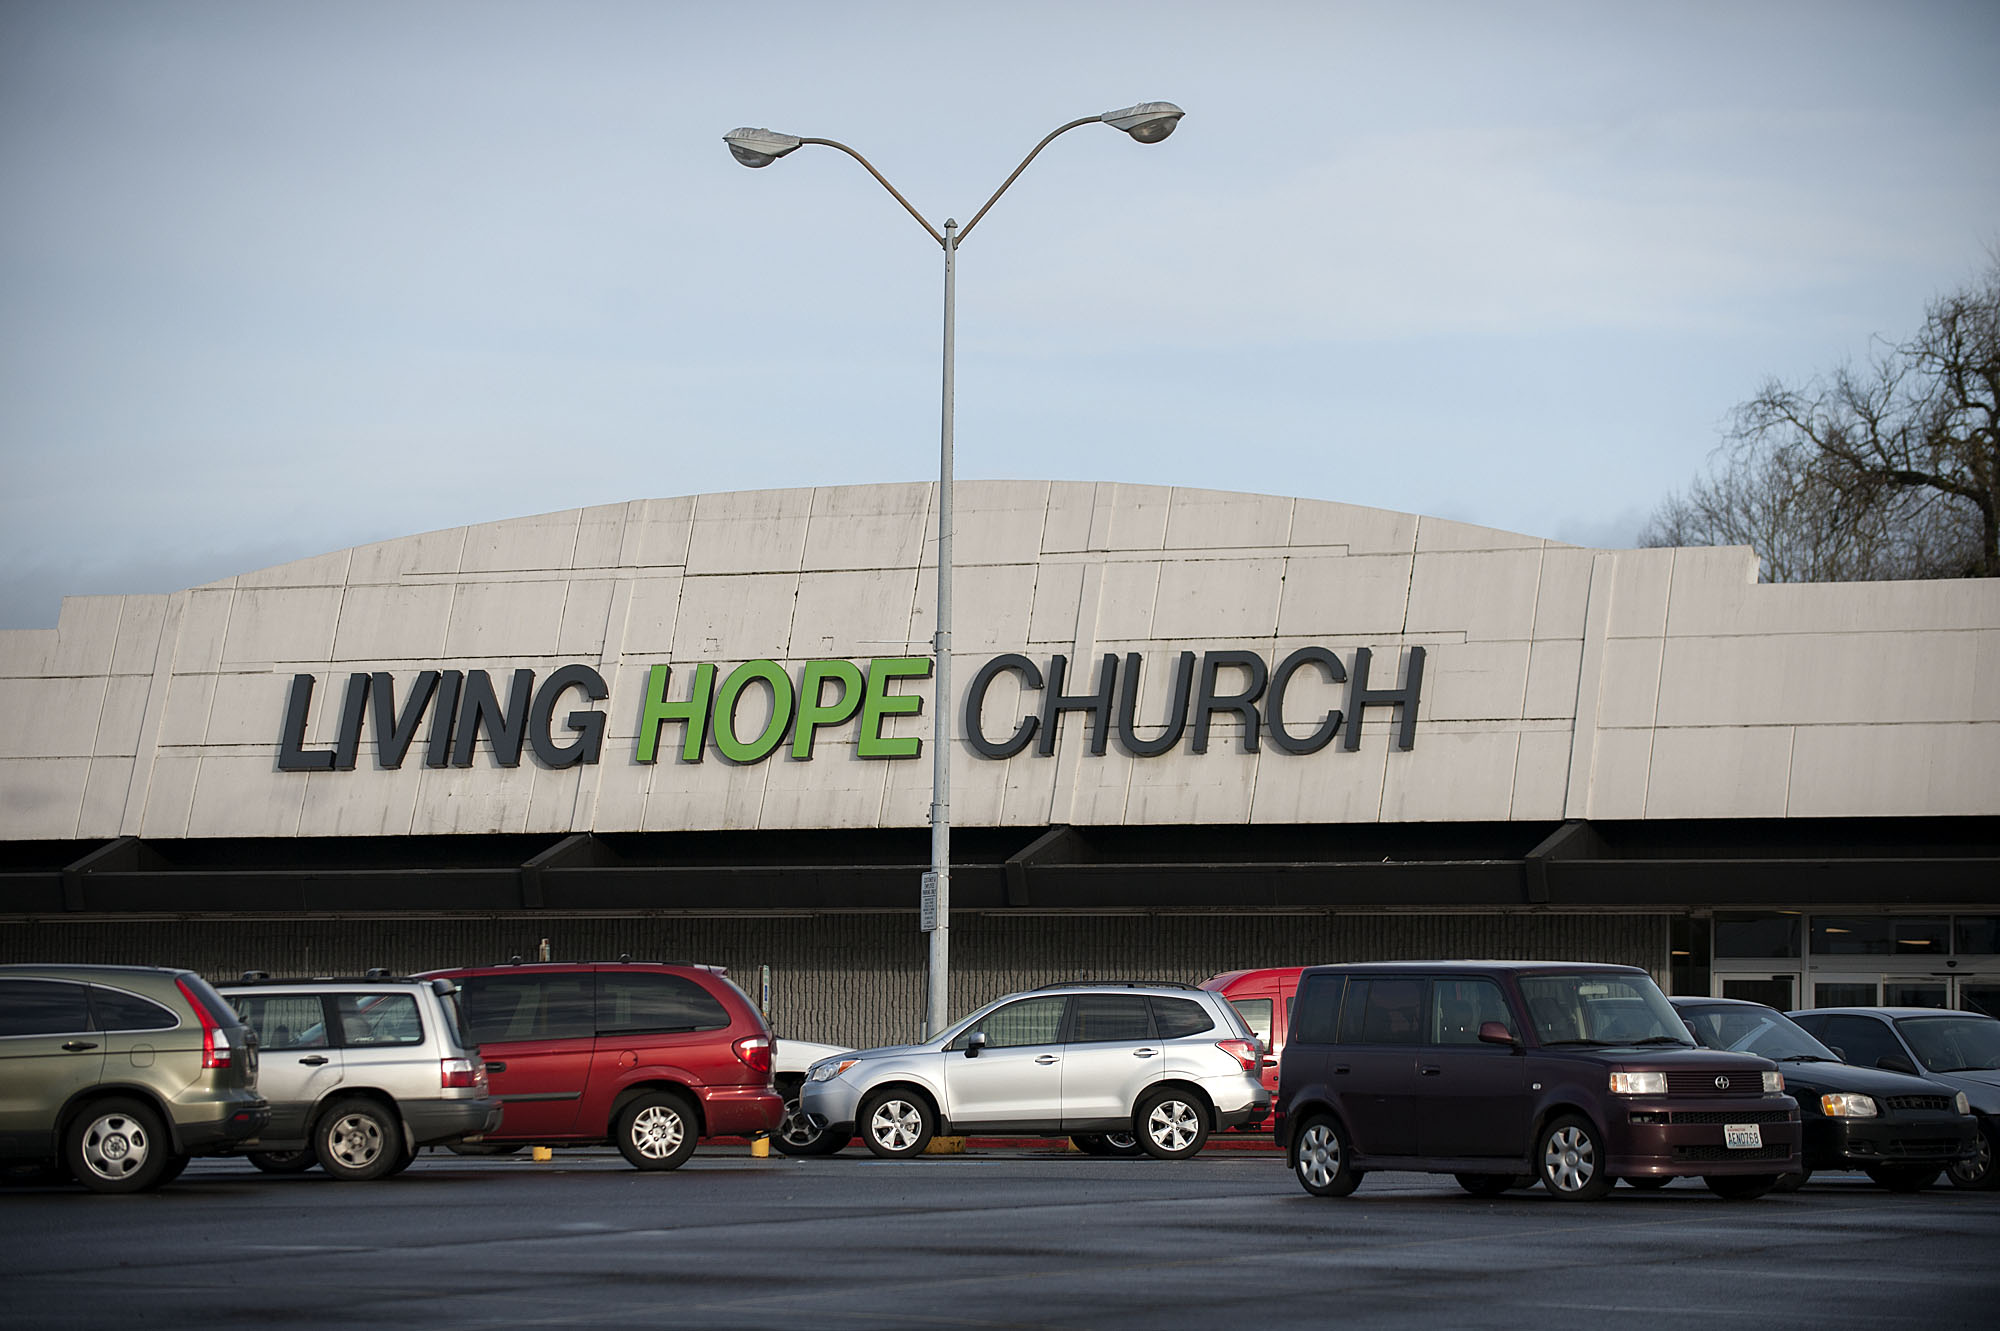 Living Hope Church was co-founded by former pastor John Bishop.